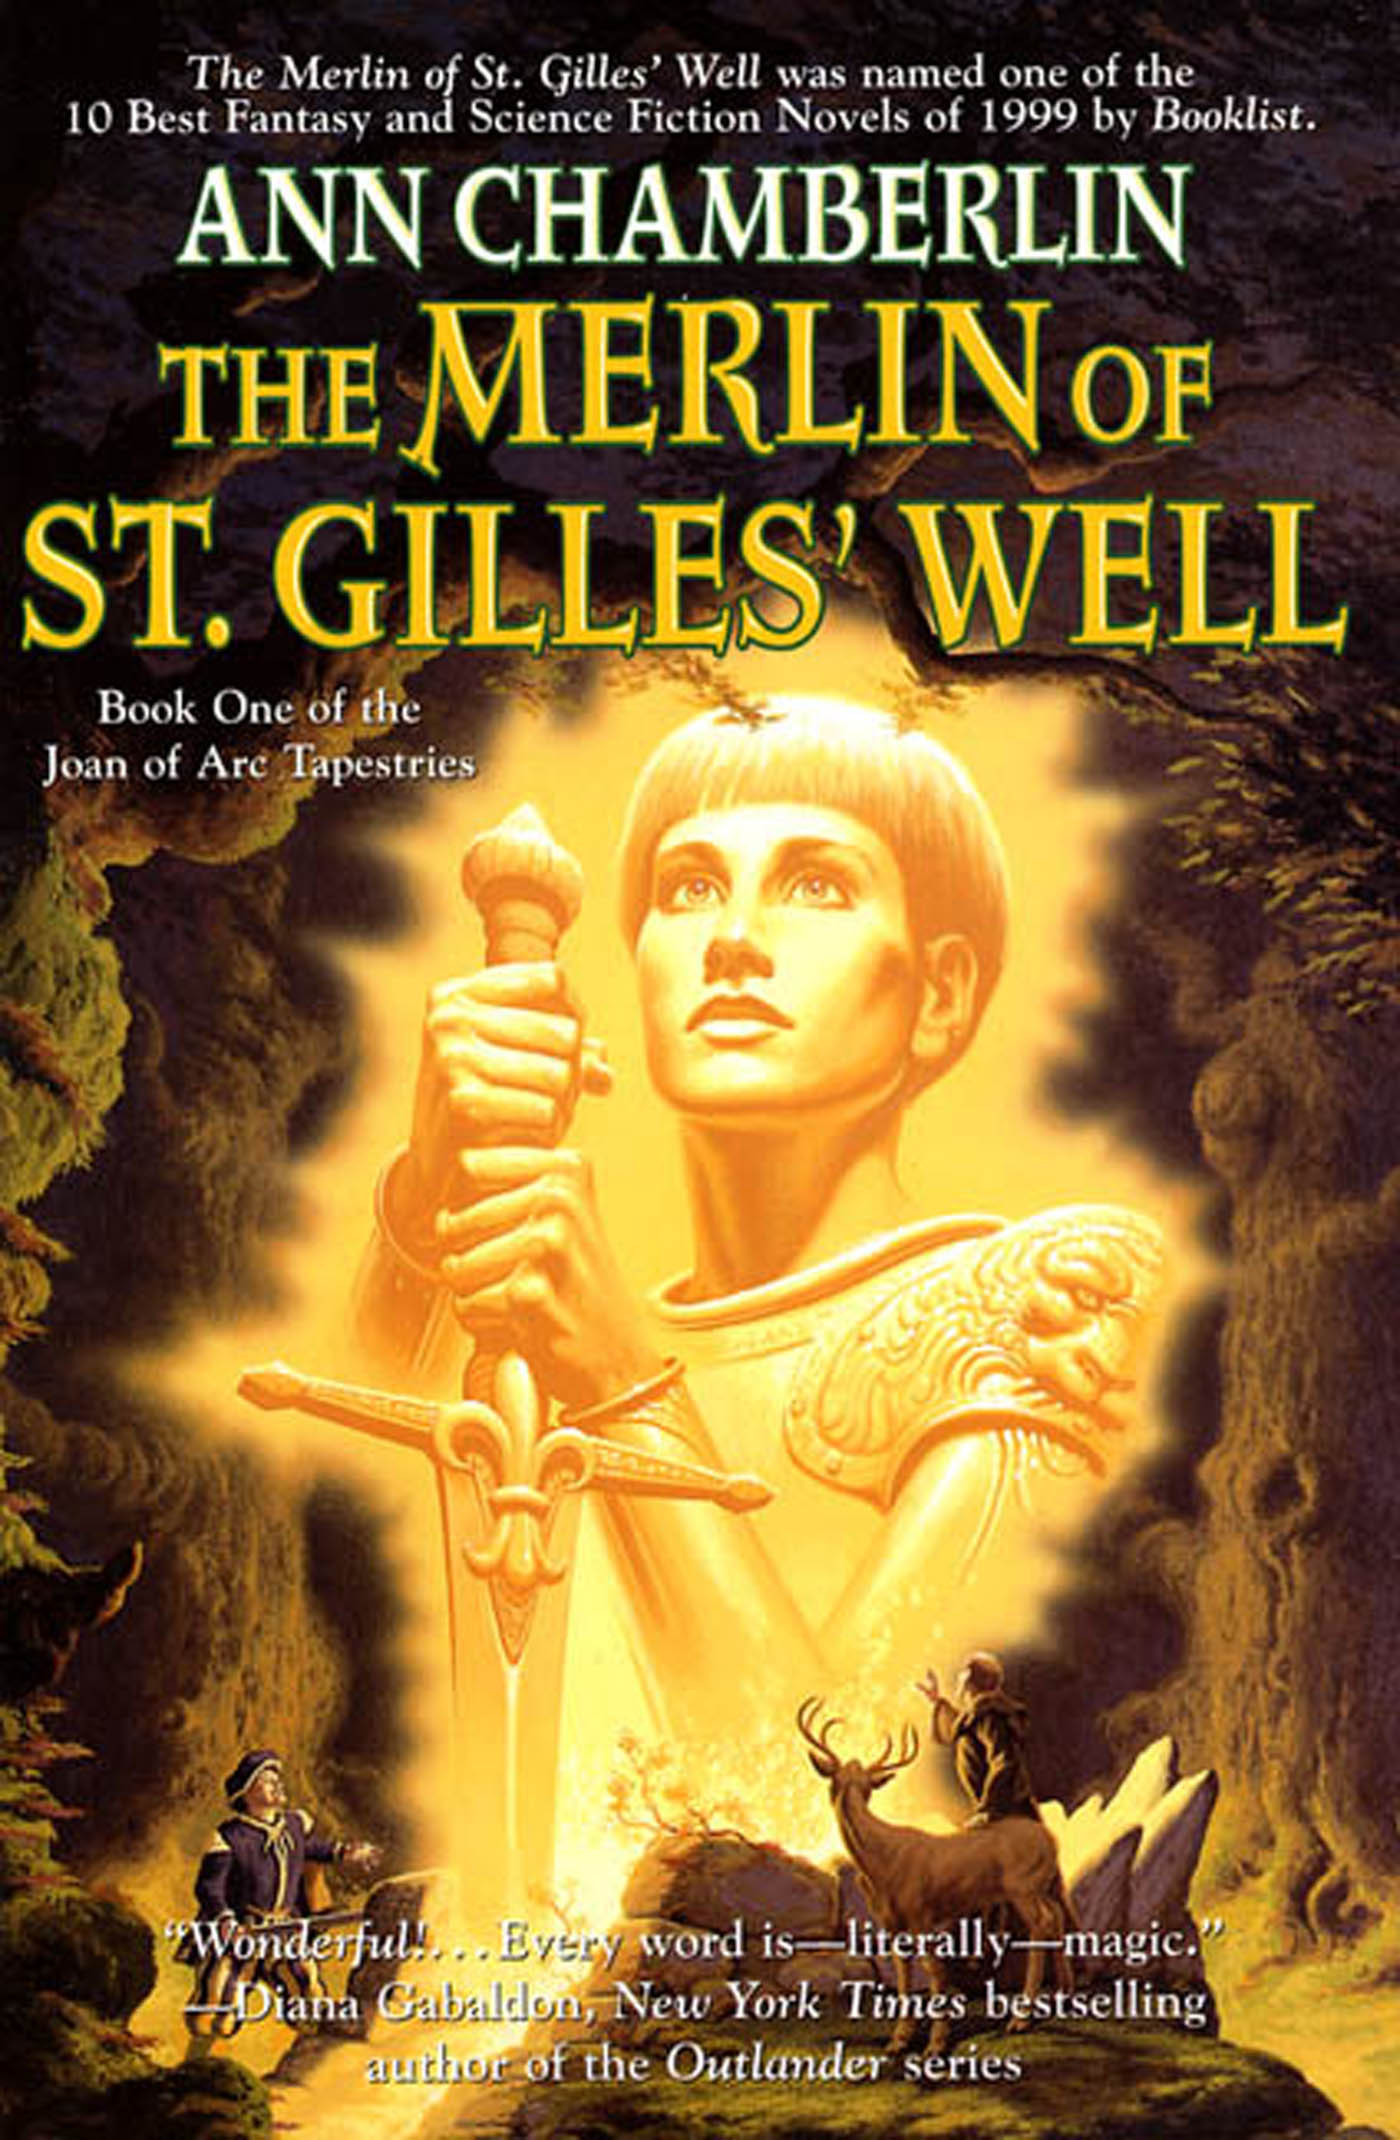 The Merlin of St. Gilles' Well by Ann Chamberlin